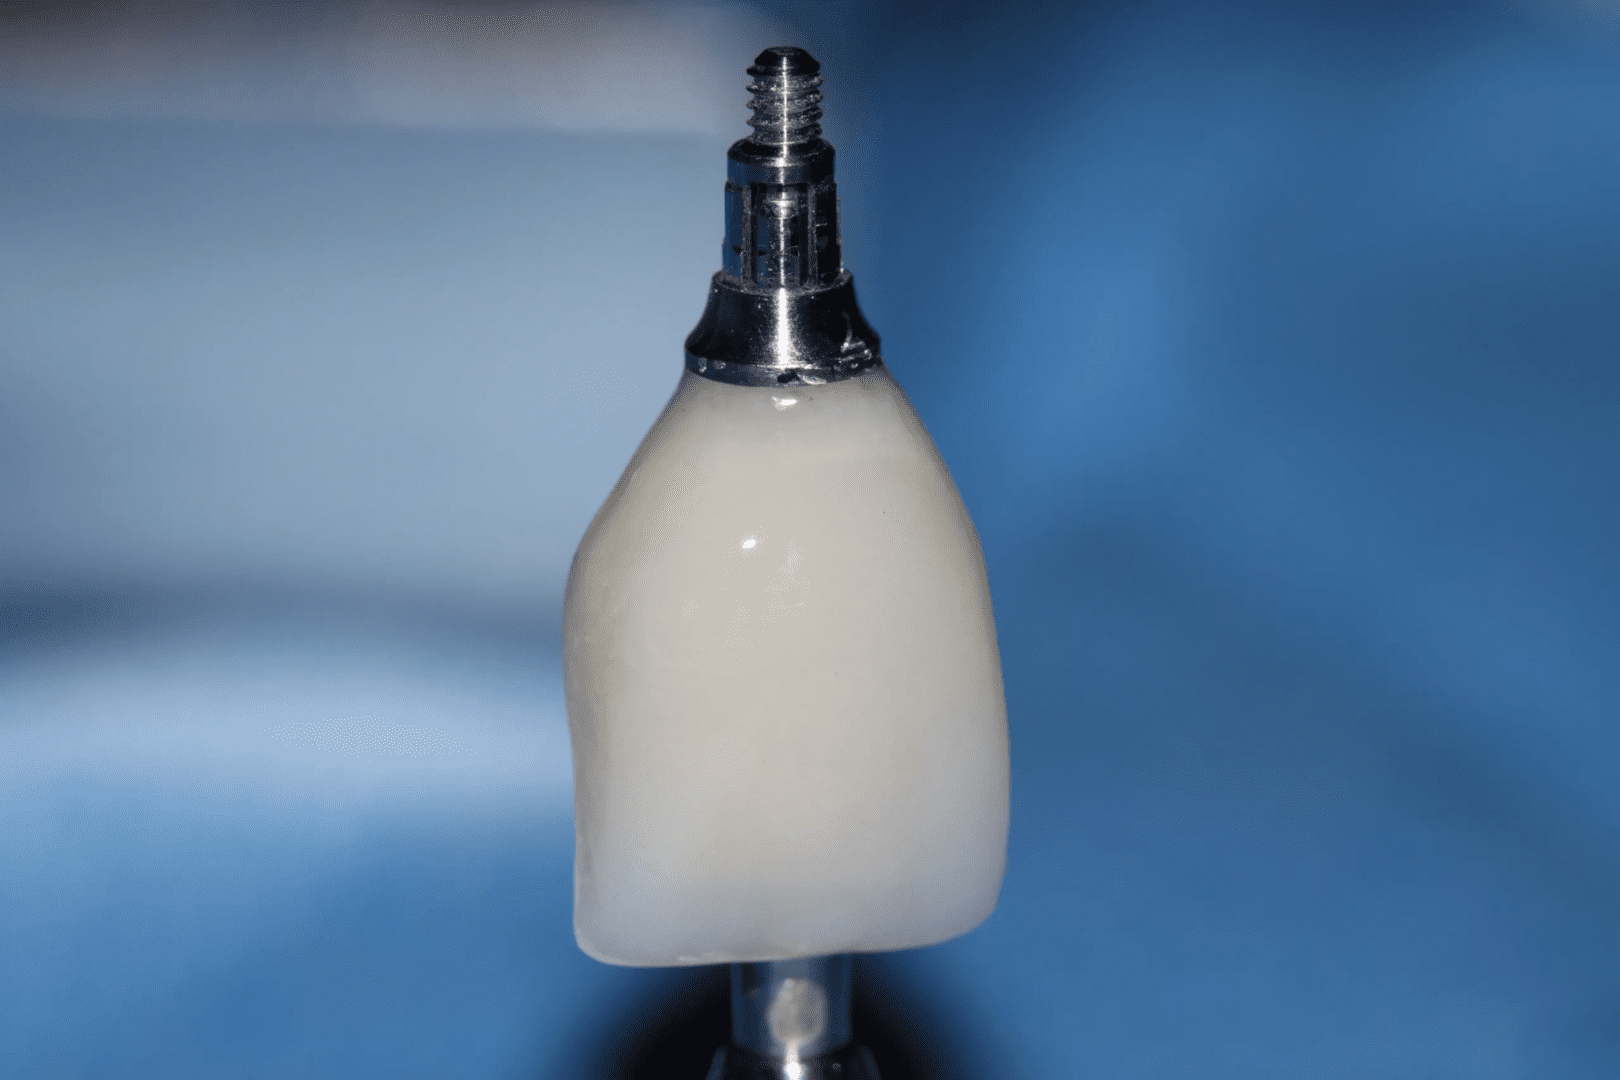 A white bottle sitting on top of a metal stand.